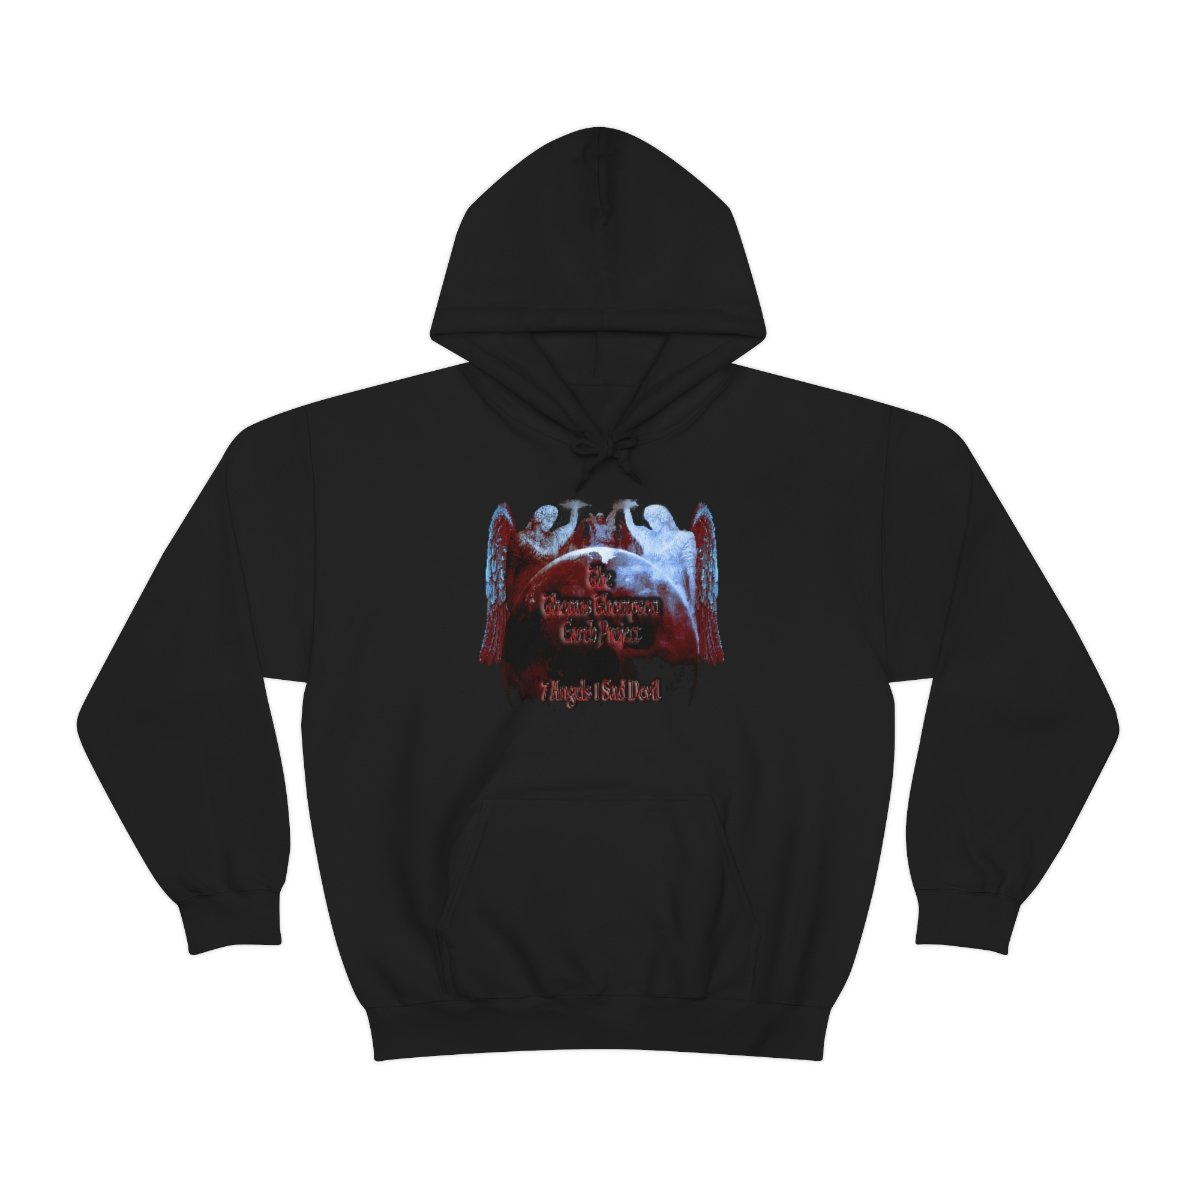 The Thomas Thompson Earth Project 7 Angels Pullover Hooded Sweatshirt